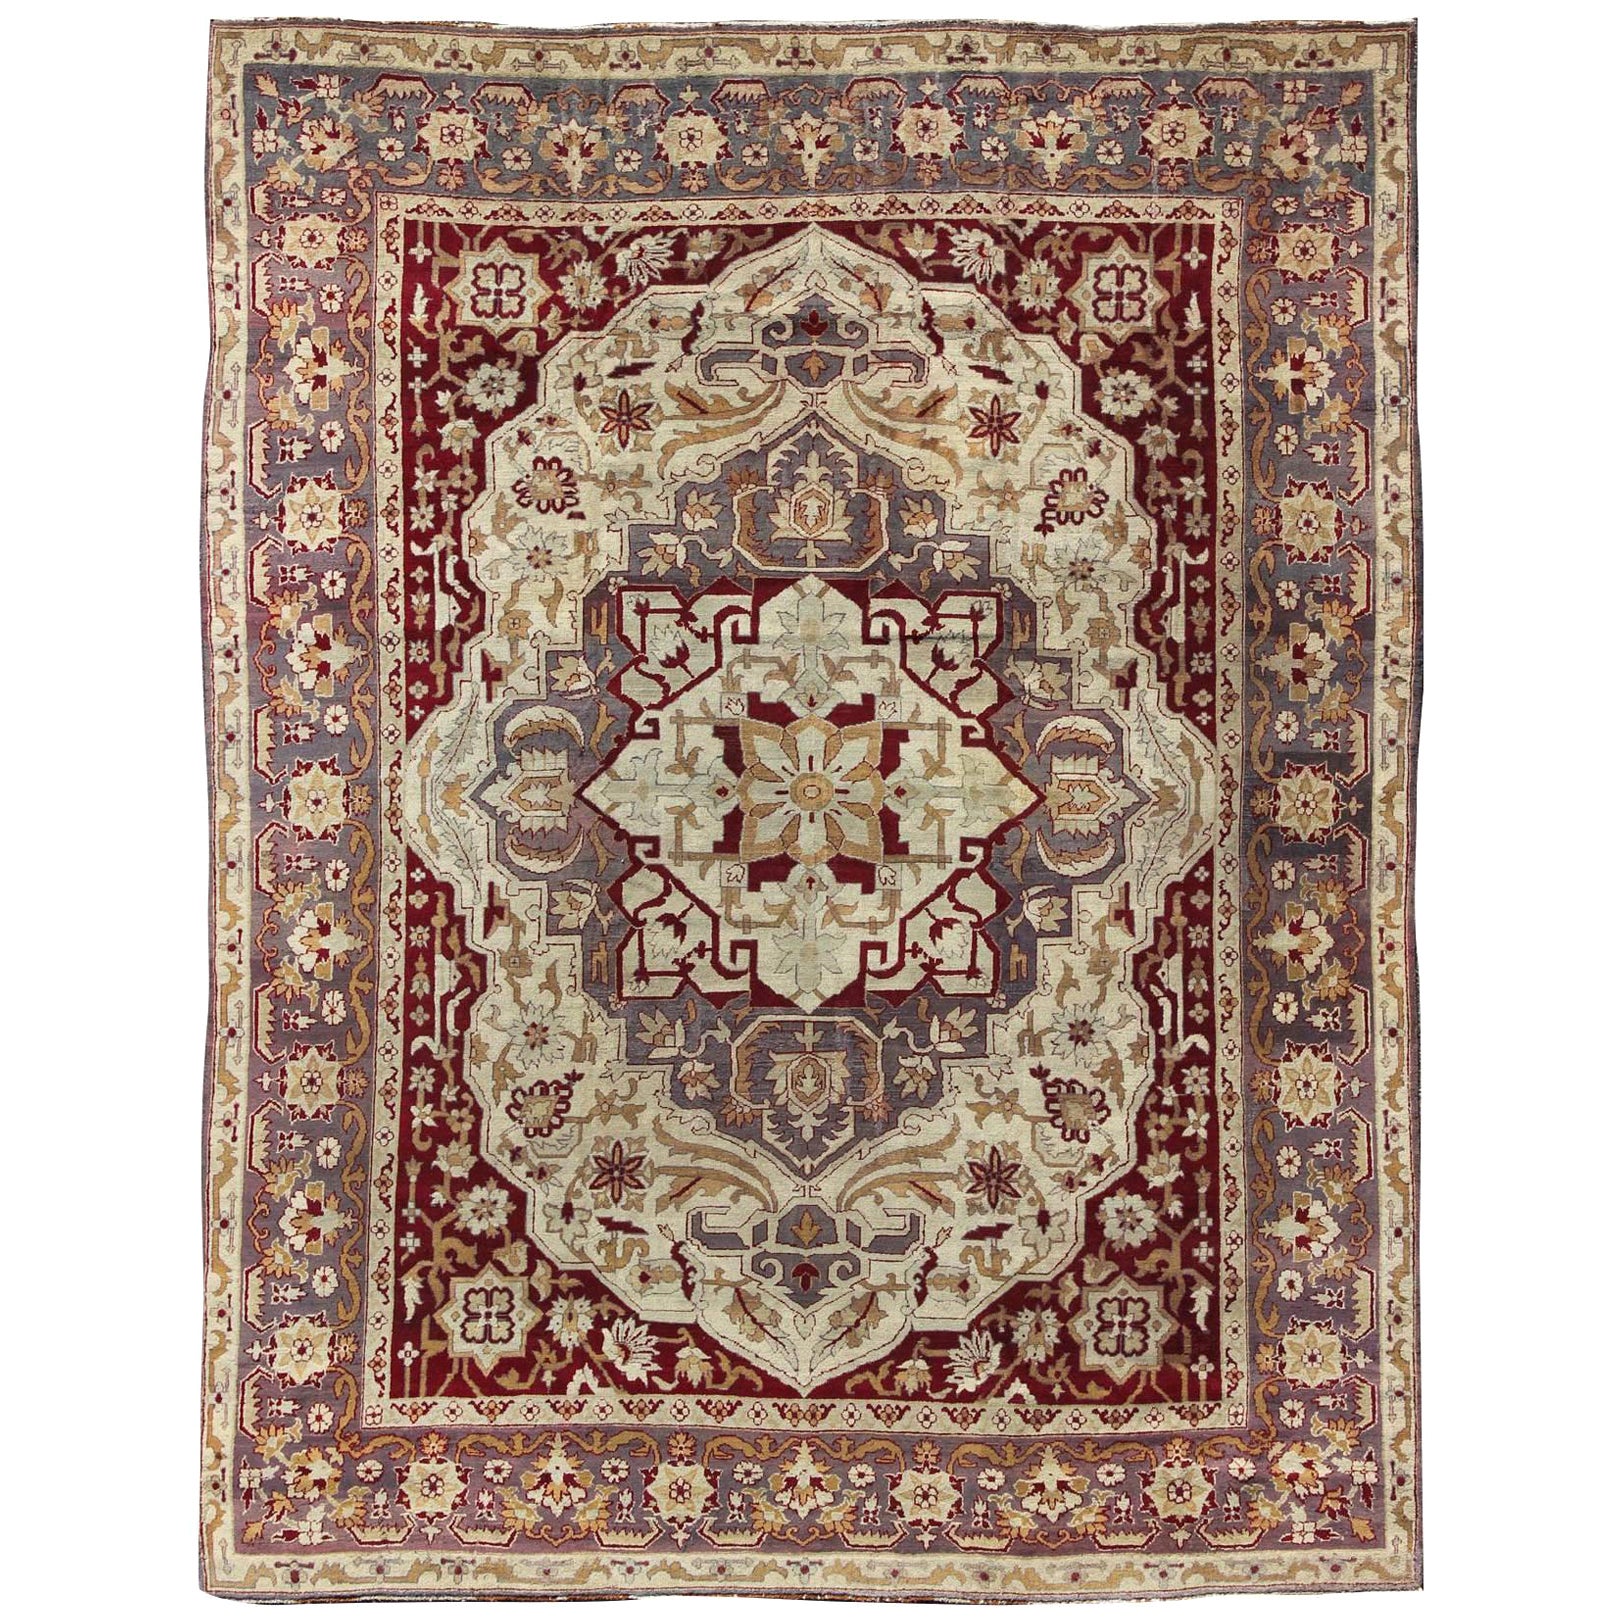 Antique 19th Century Indian Agra Carpet with a Floral Medallion Design For Sale